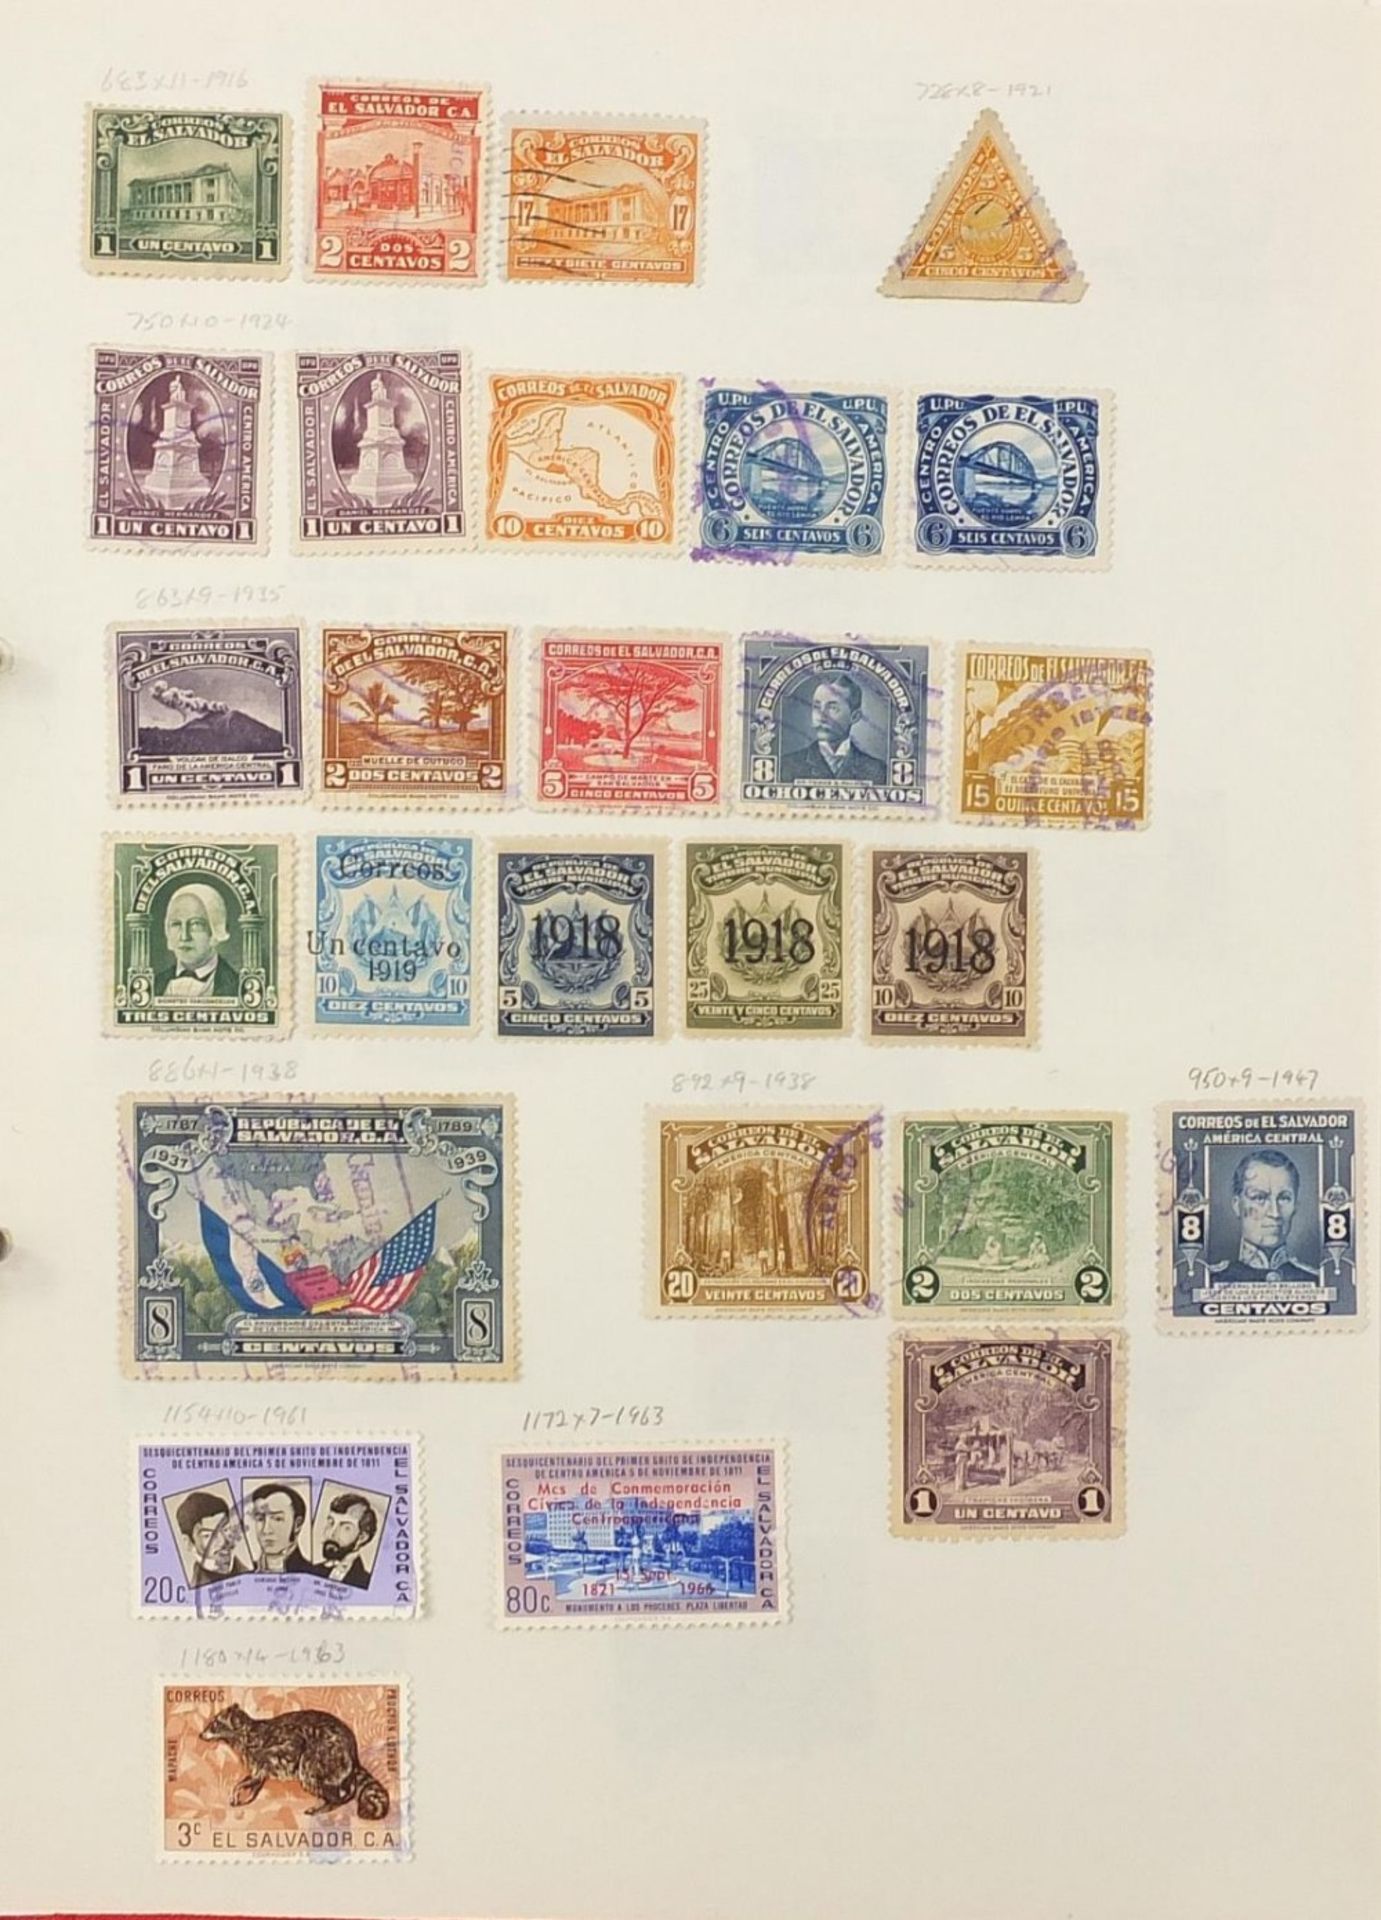 Extensive collection of antique and later world stamps arranged in albums including Brazil, - Image 28 of 52